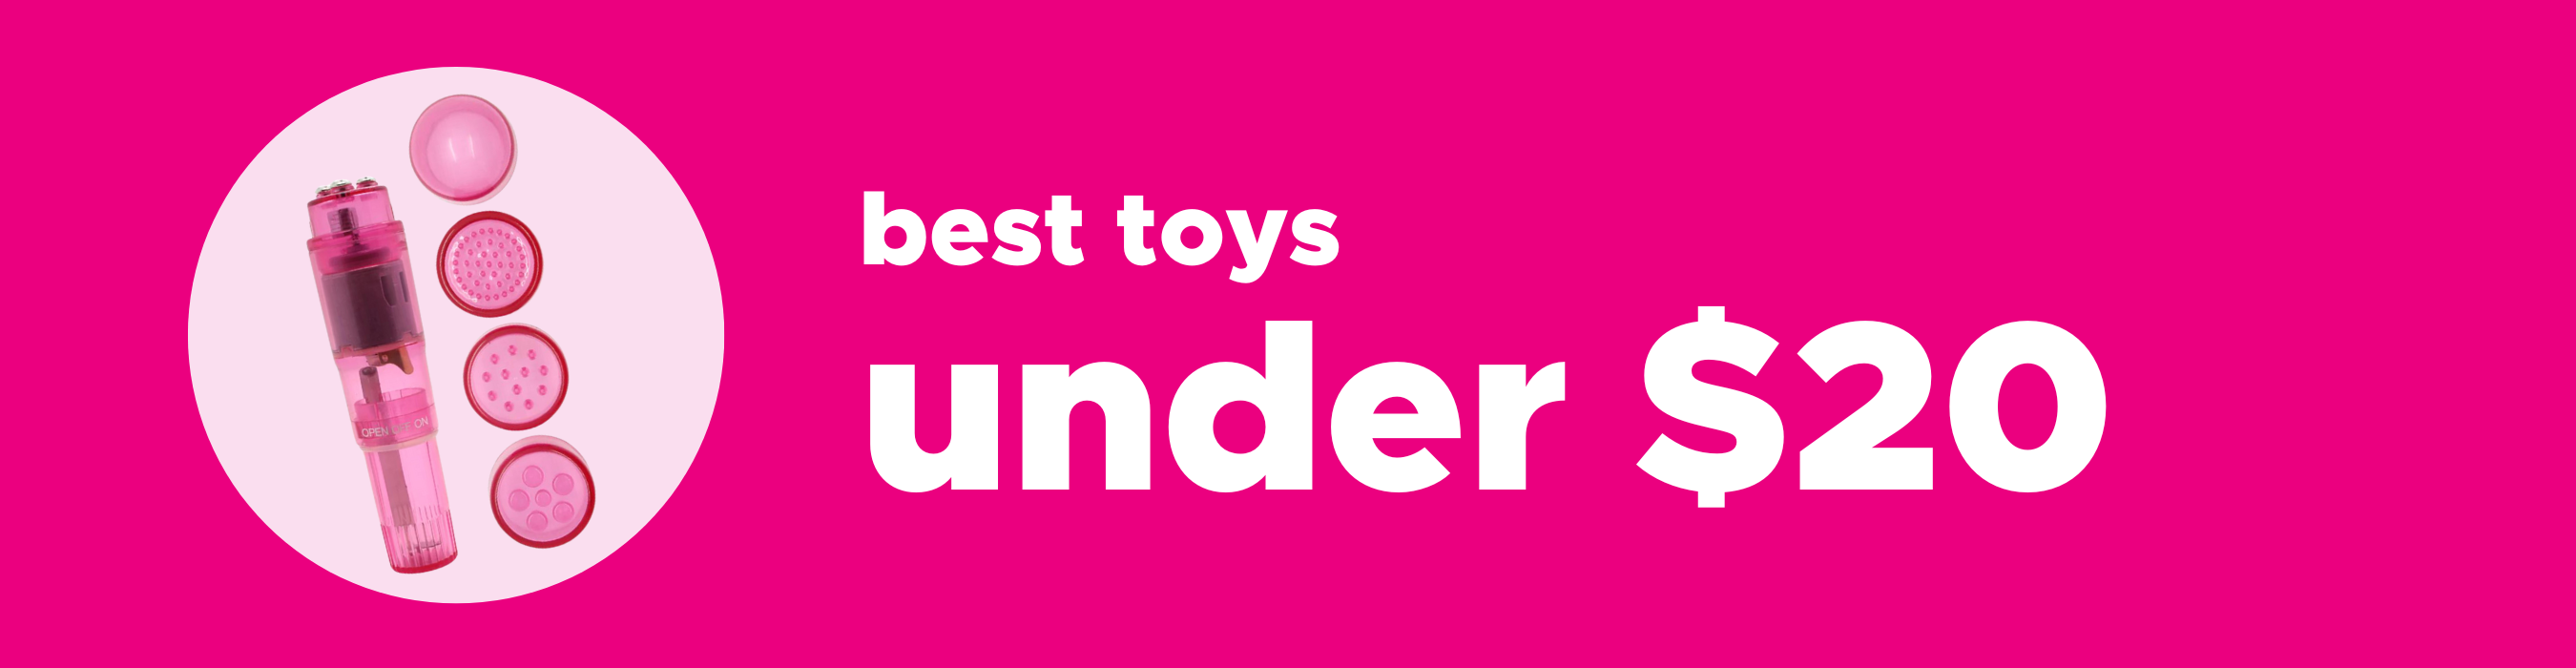 Shop our collection of best toys under $20